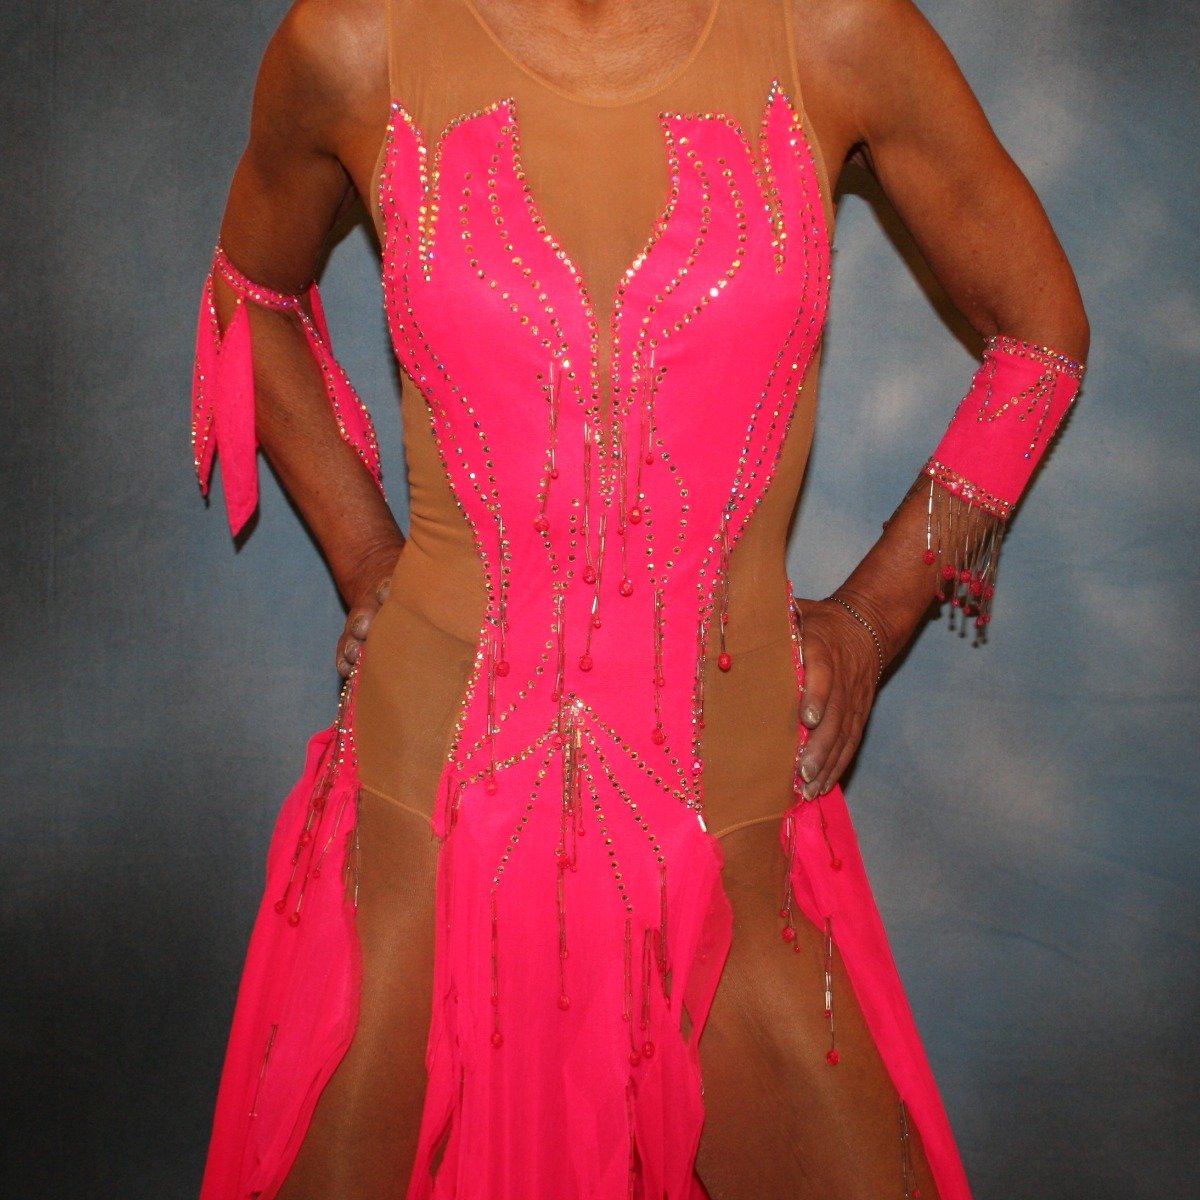 close view of Hot pink Latin dress created of hot pink tricot chiffon overlayed on nude illusion base with flame effect is embellished with CAB Sawovski rhinestones & hand beading on sale!